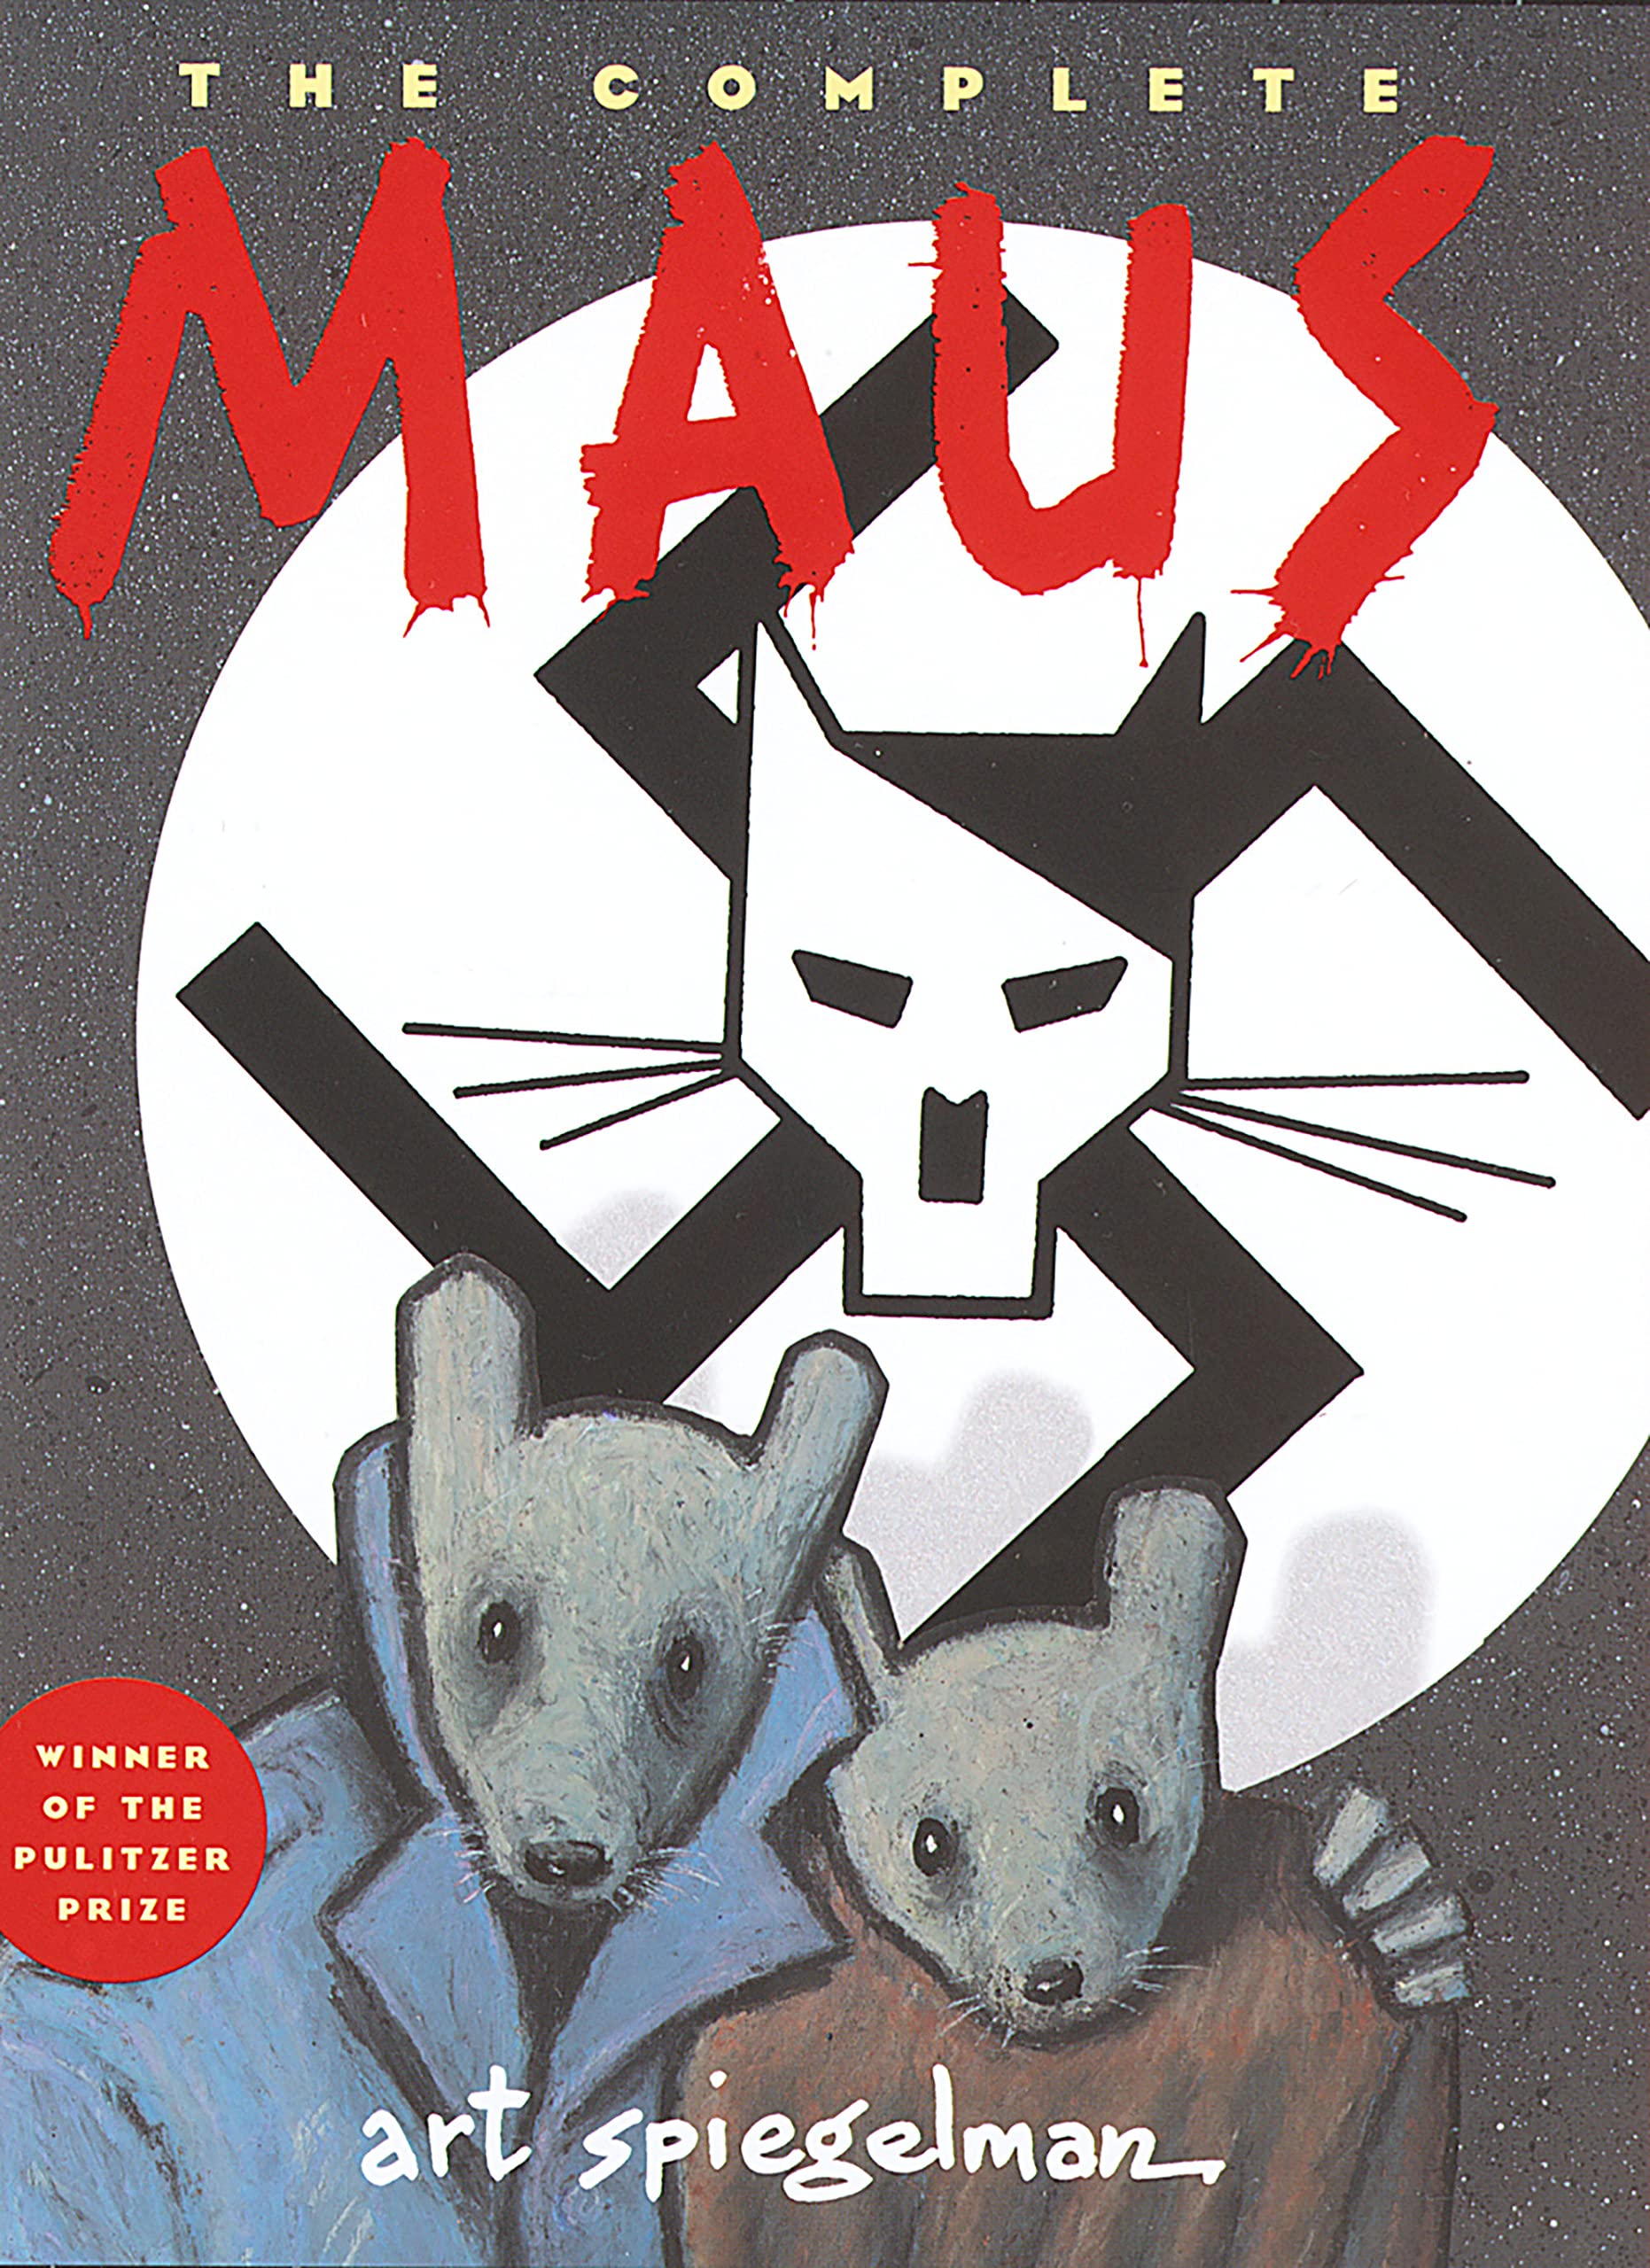 The Cover of the book Maus showing a Swastica and two mice.